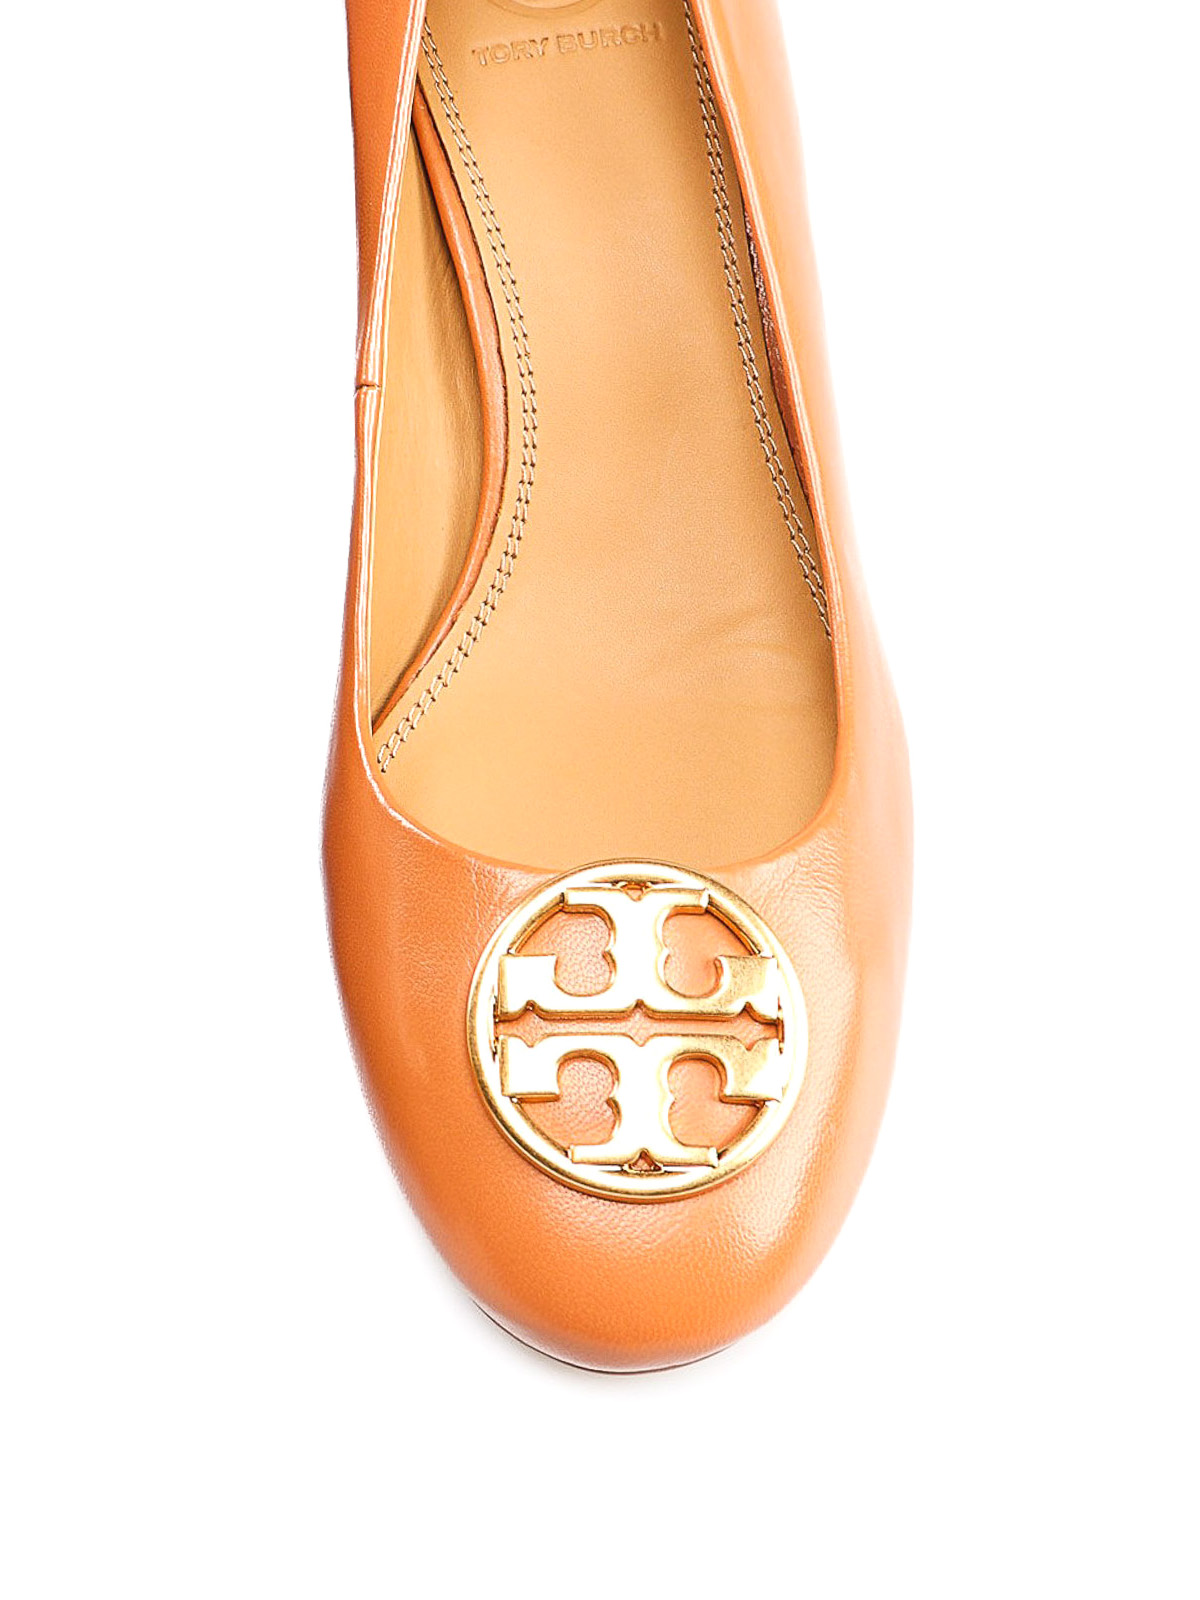 Court shoes Tory Burch - Chelsea leather pumps - 45900240 